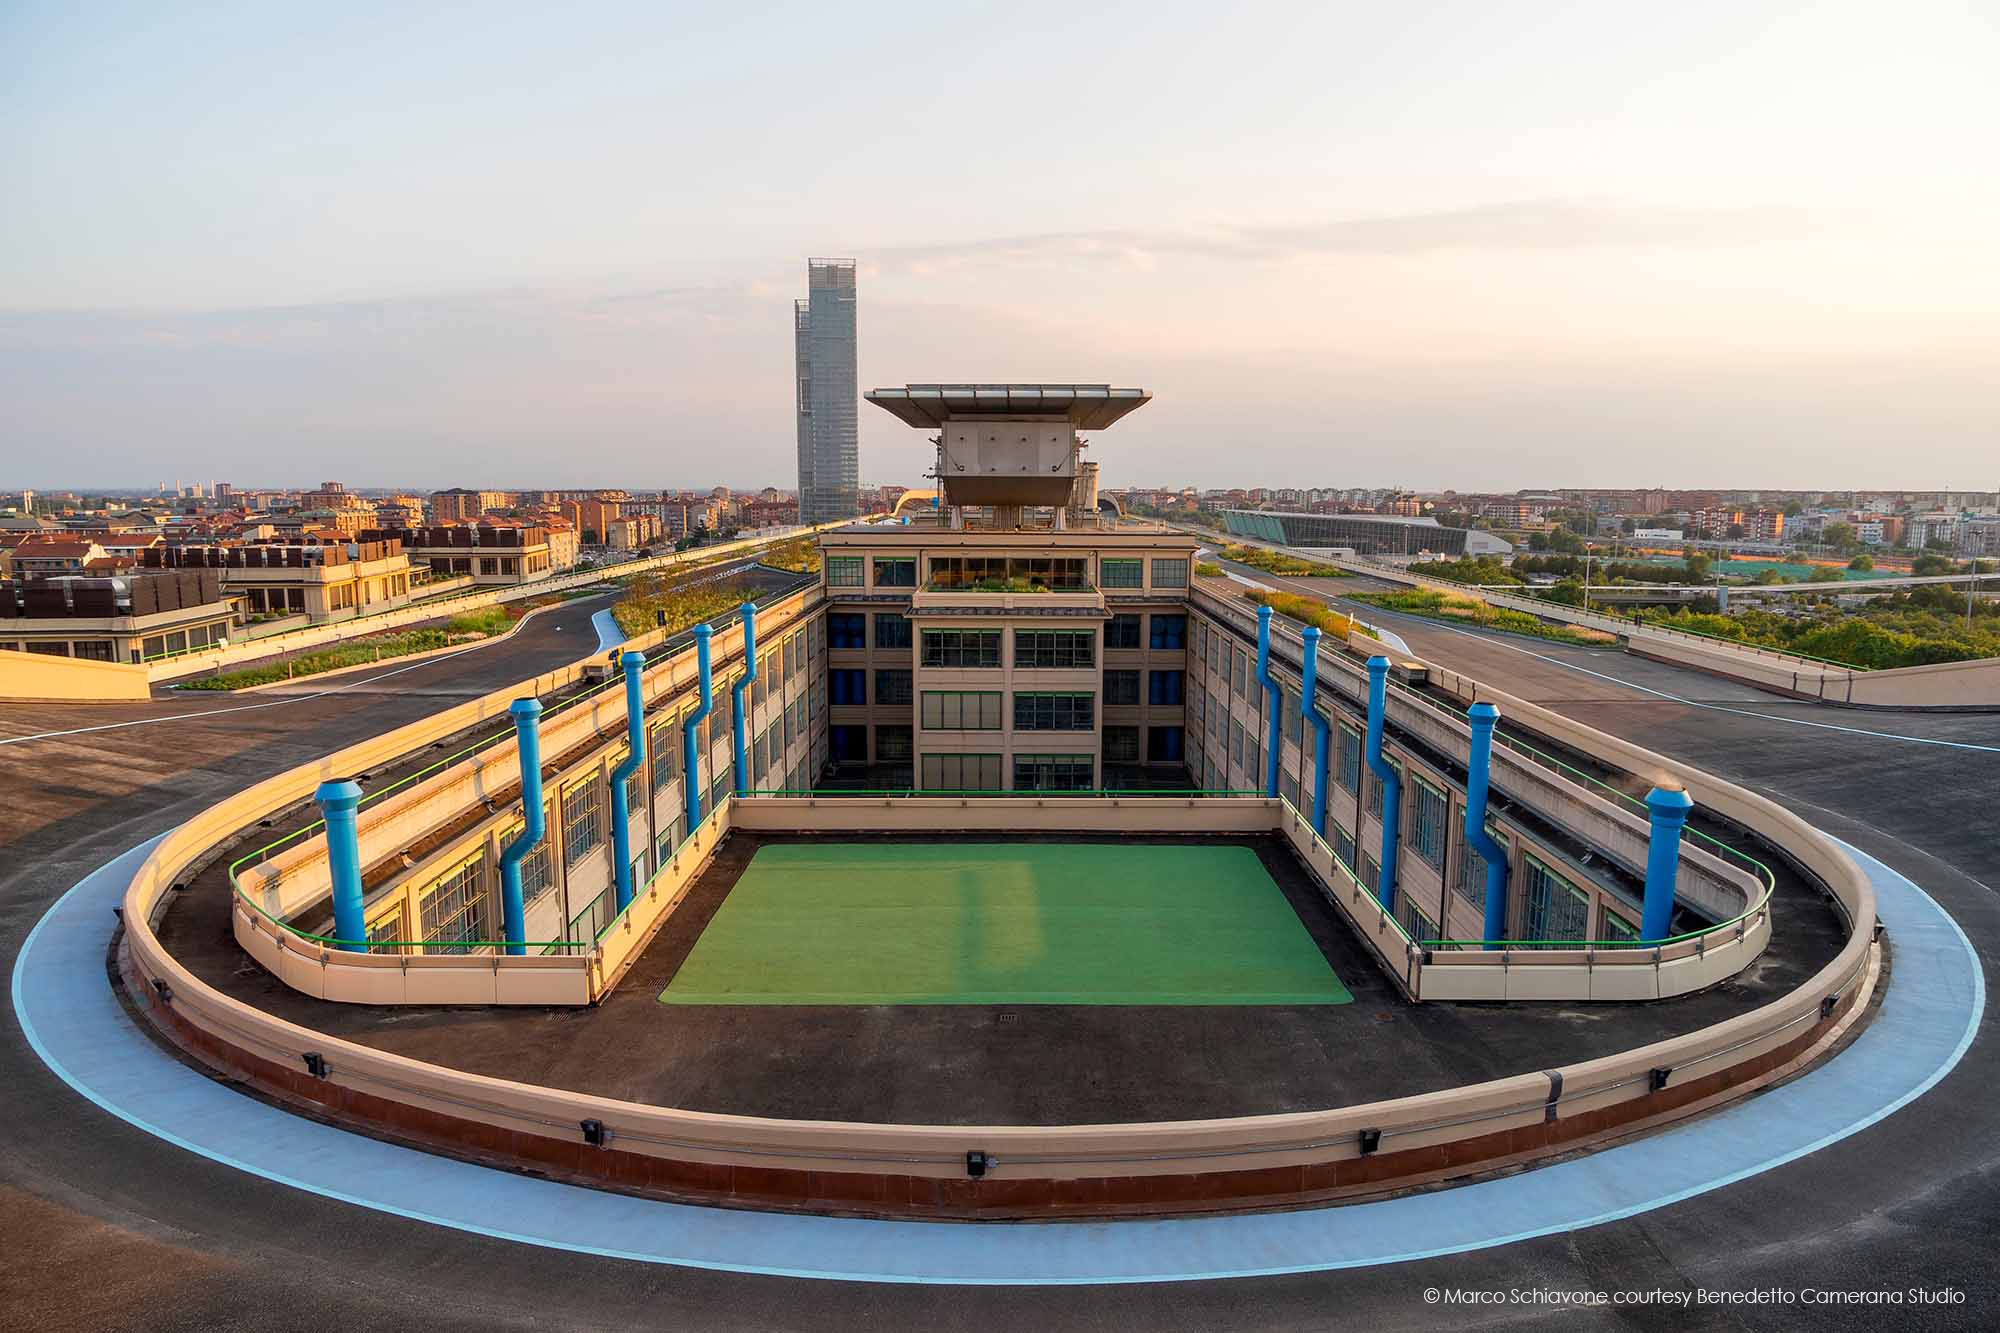 Lingotto – “Certainly one of the most impressive spectacles of the industry” (Le Corbusier)